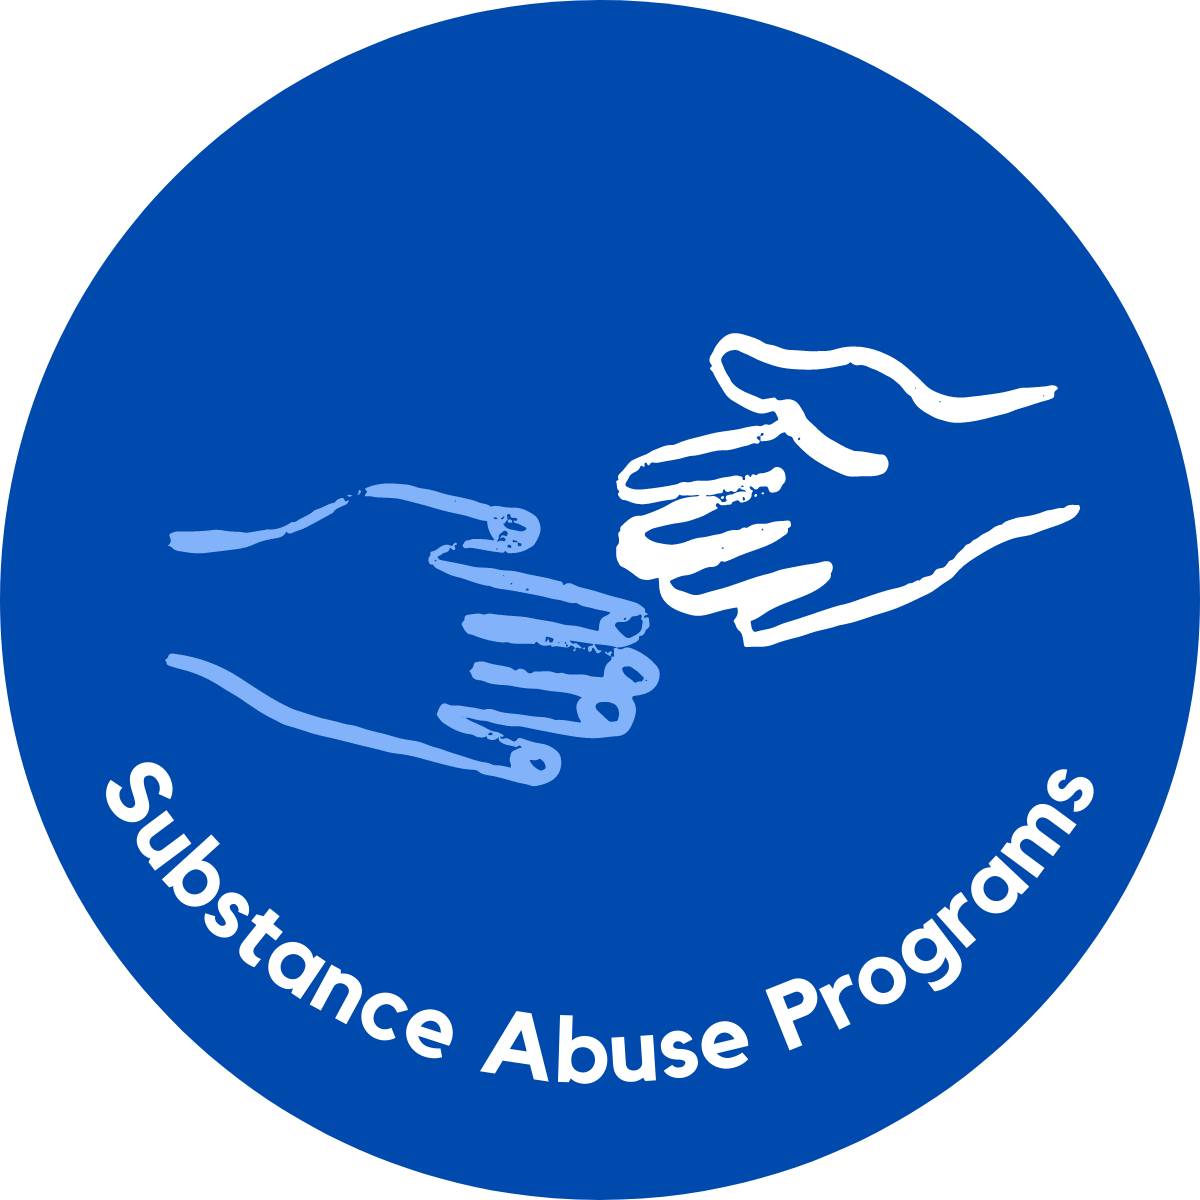 Substance abuse programs